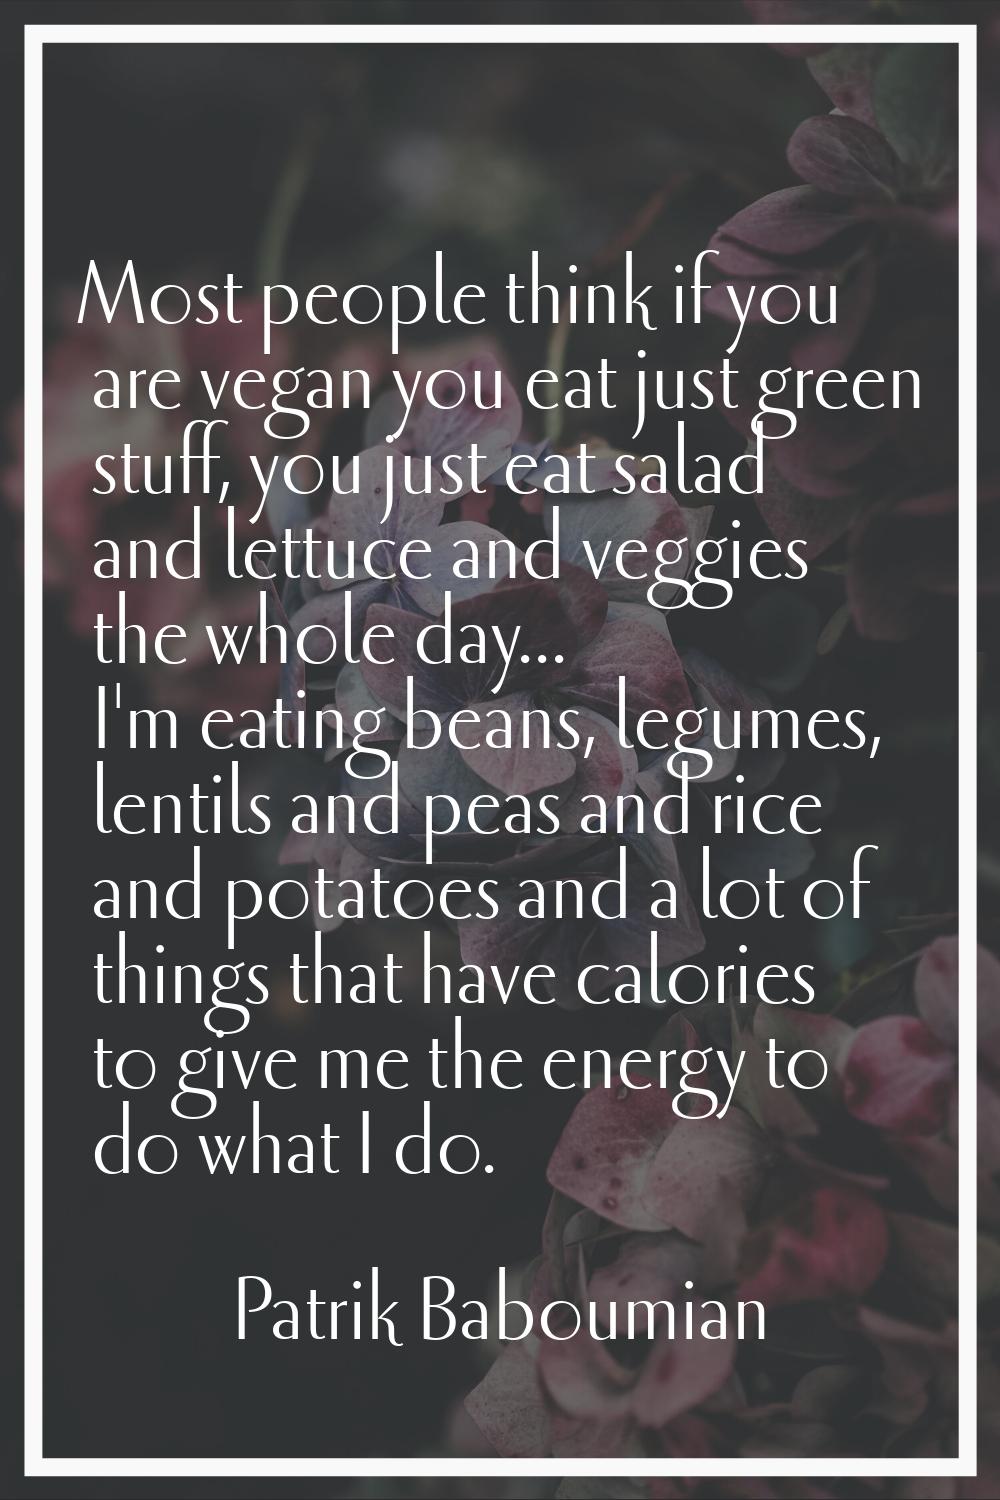 Most people think if you are vegan you eat just green stuff, you just eat salad and lettuce and veg